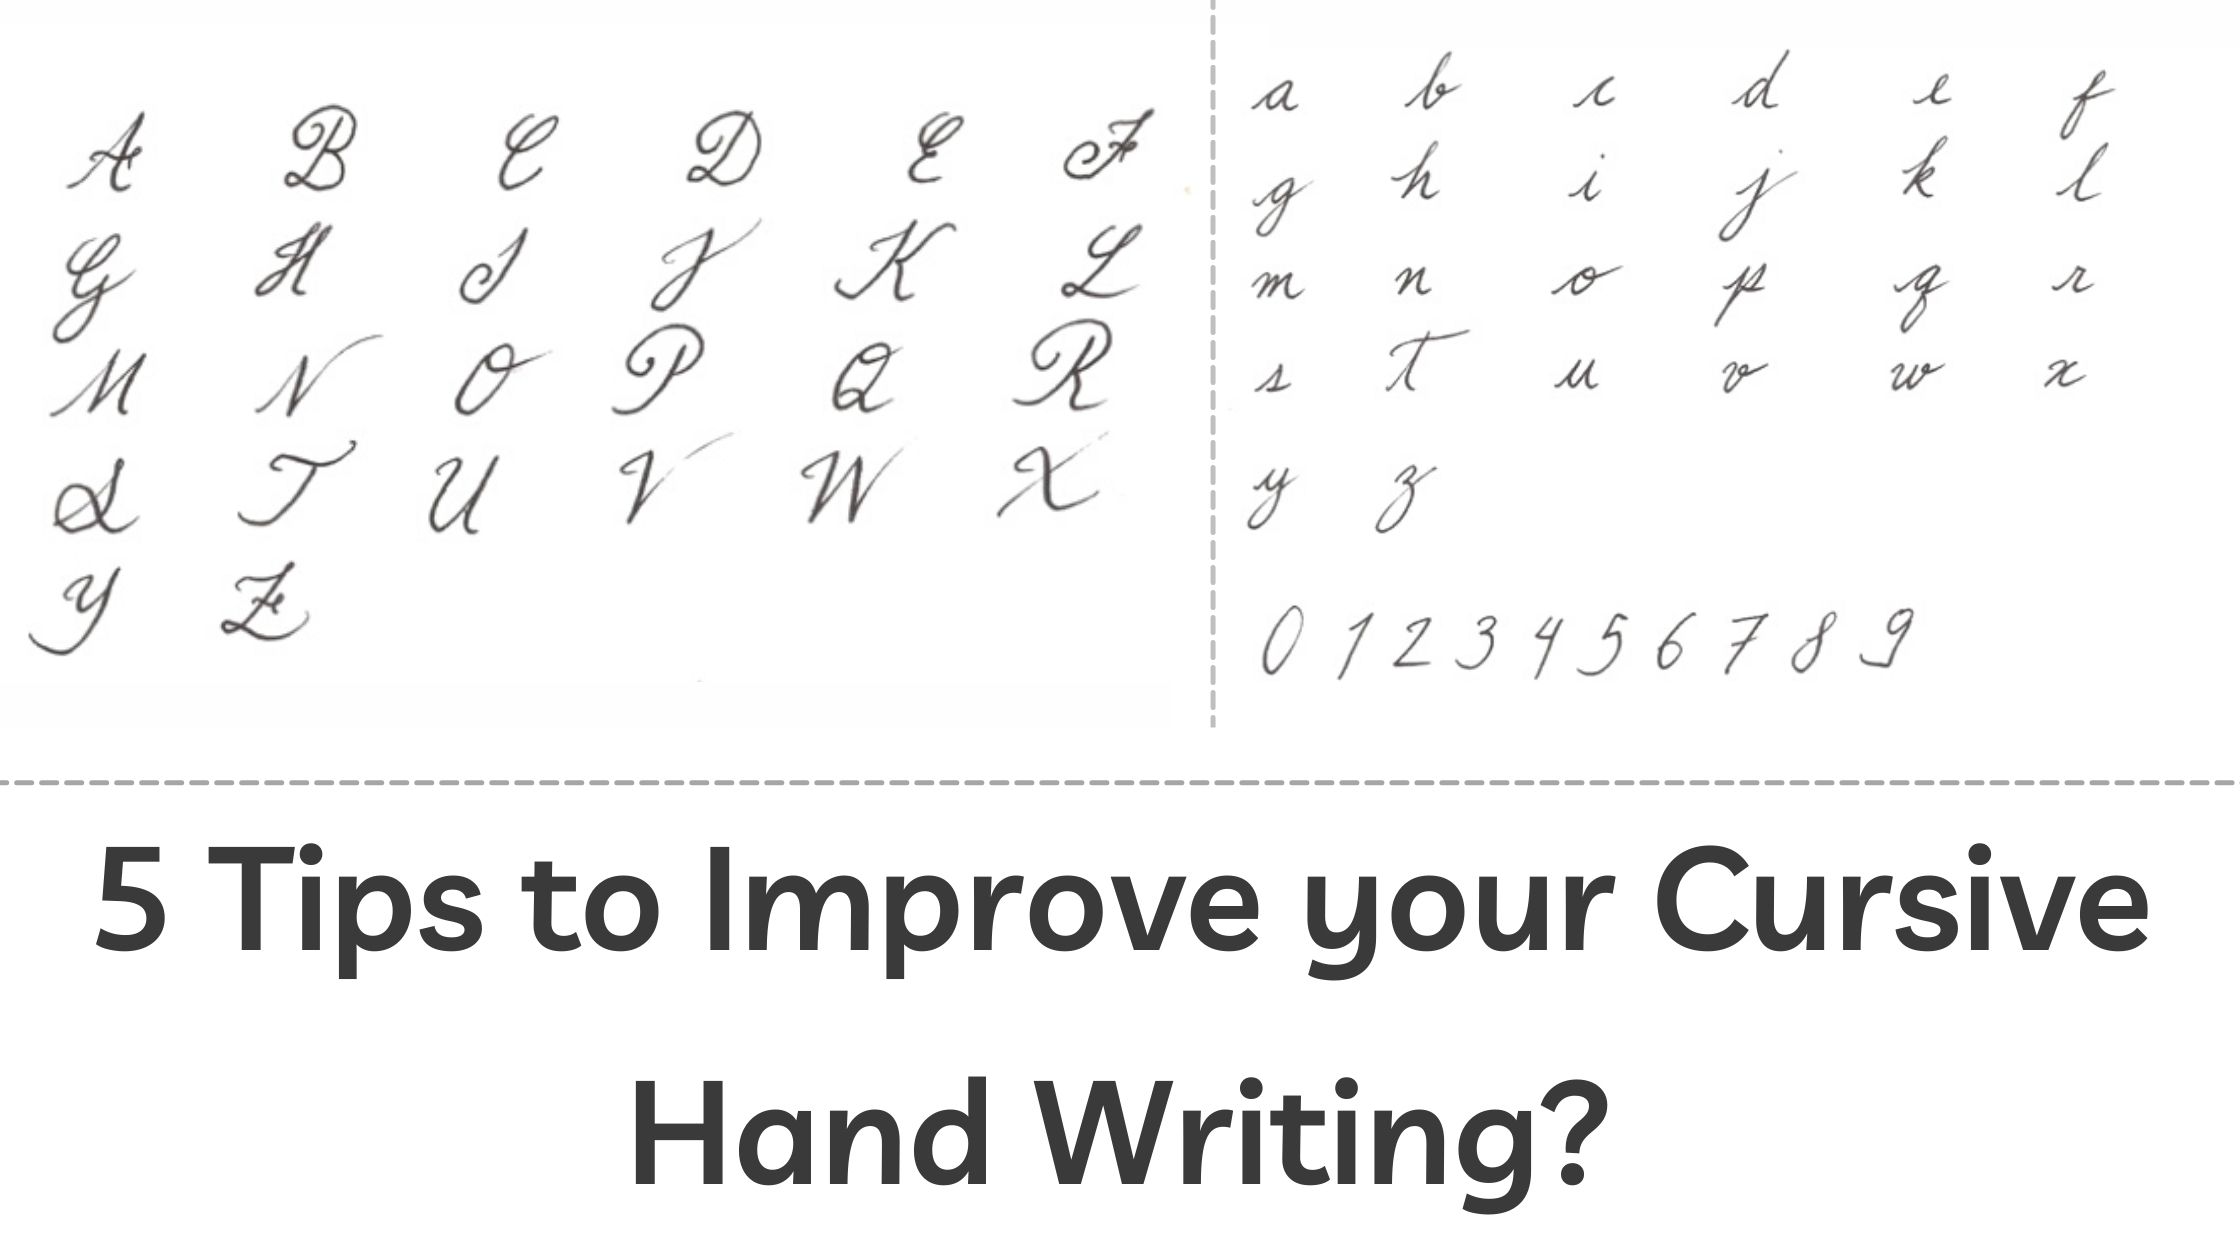 5 Tips to Improve your Cursive Hand Writing